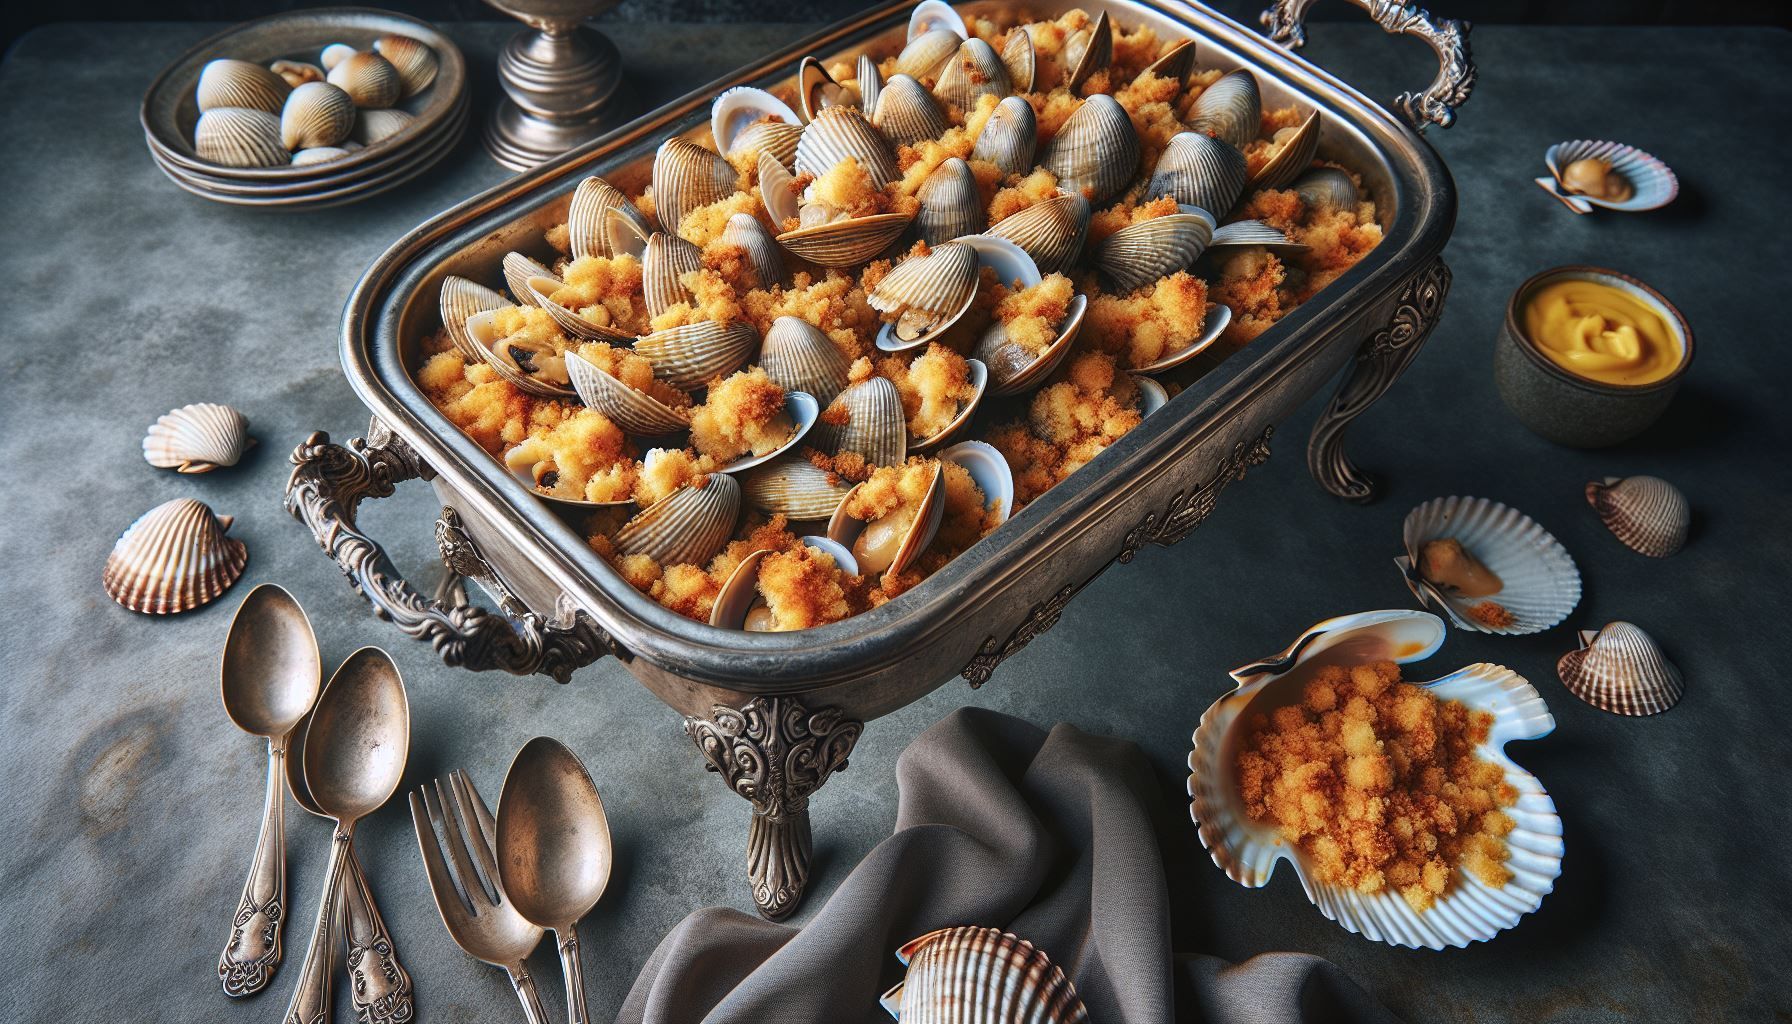 A silver tray filled with clams and rice on a table.